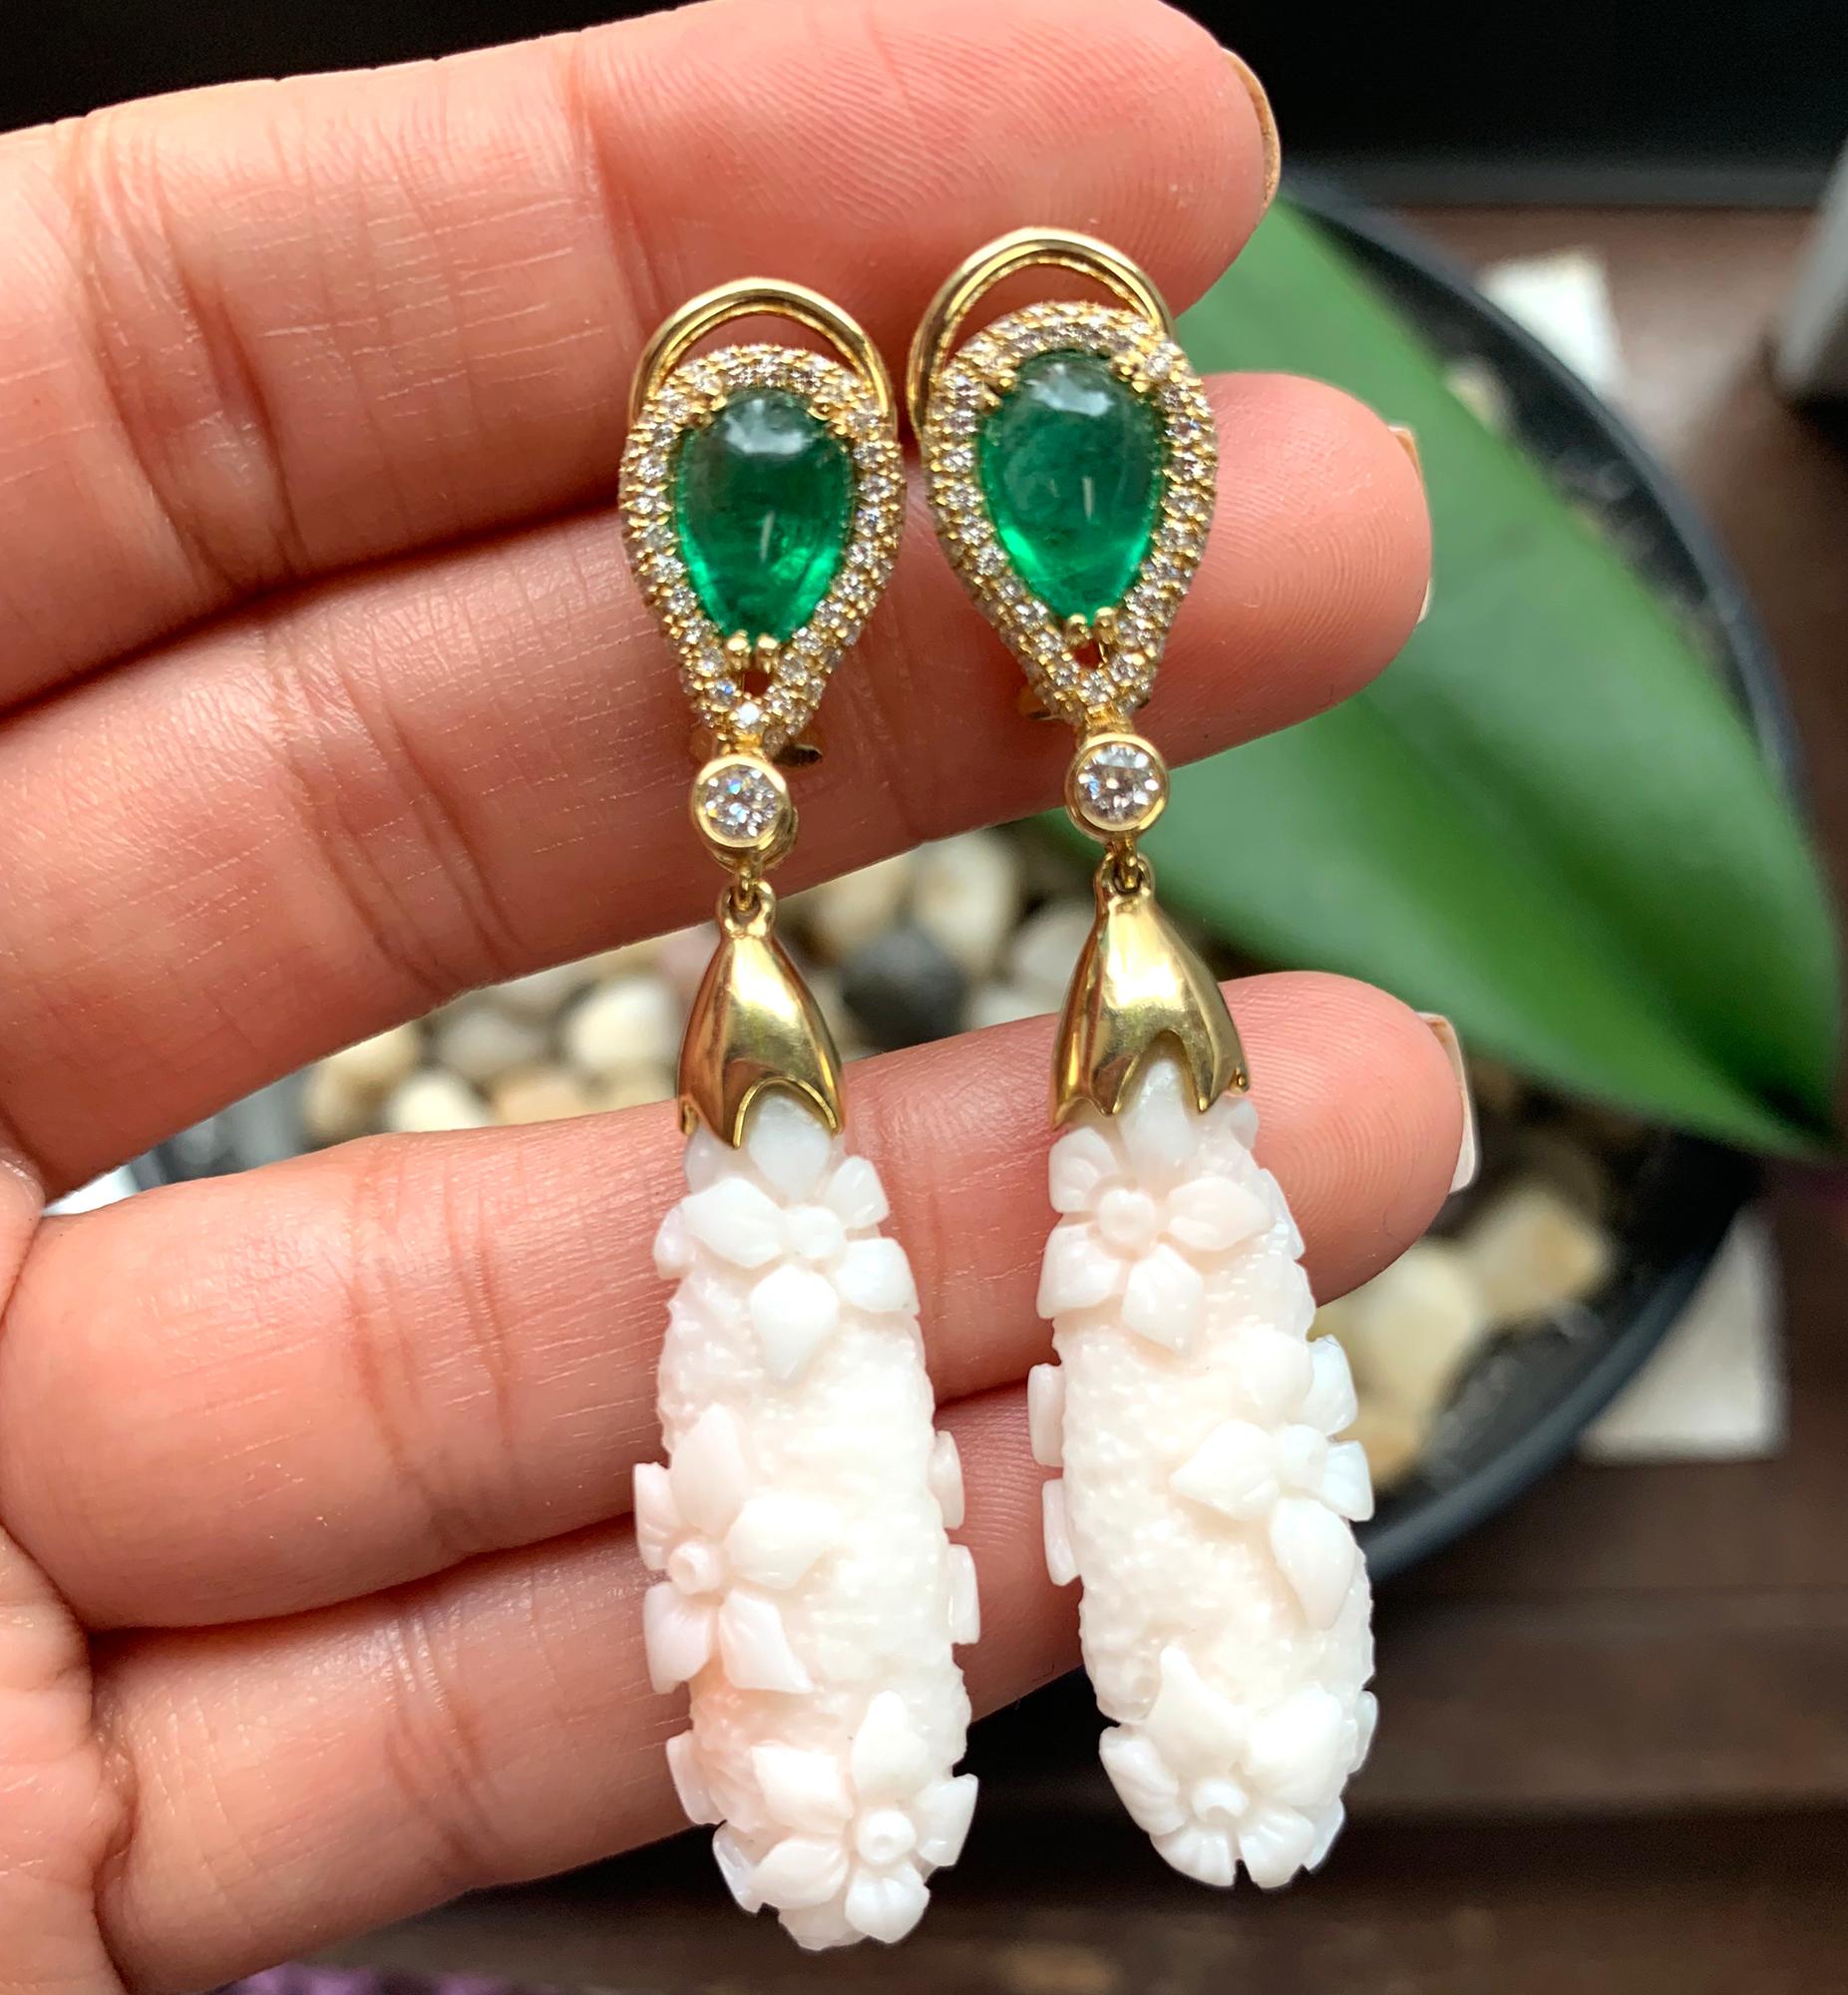 These White Coral Flower Engraved Earrings with Emerald and Diamond Tops in Yellow Gold are a stunning pair of earrings from the 'G-One' collection. The earrings feature engraved flowers in the white coral, which dangle elegantly from a top section